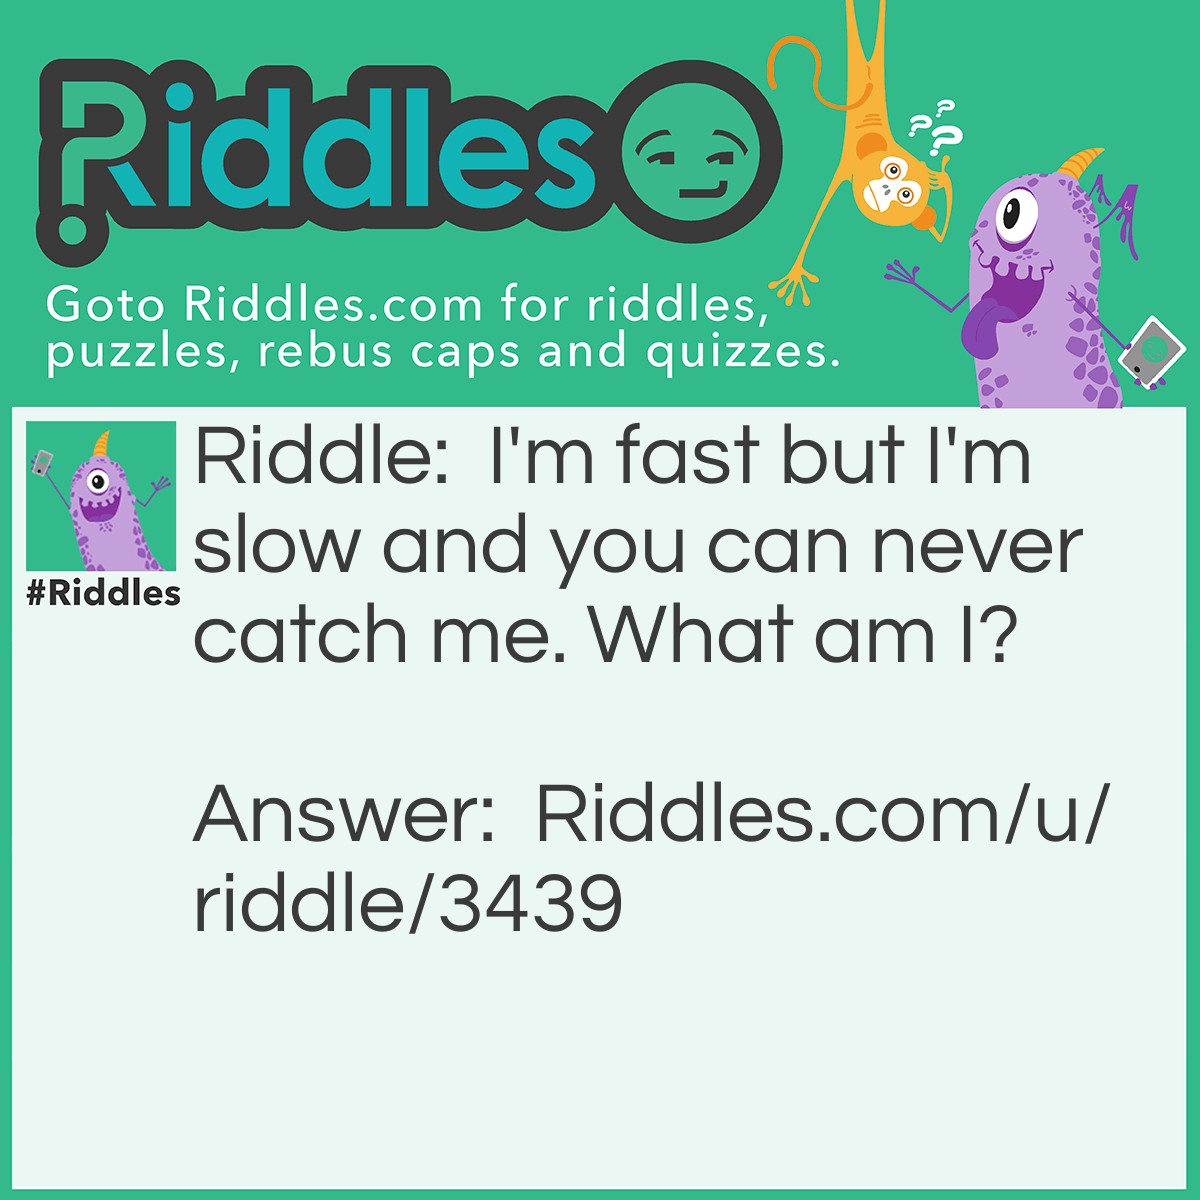 Riddle: I'm fast but I'm slow and you can never catch me. What am I? Answer: Time.